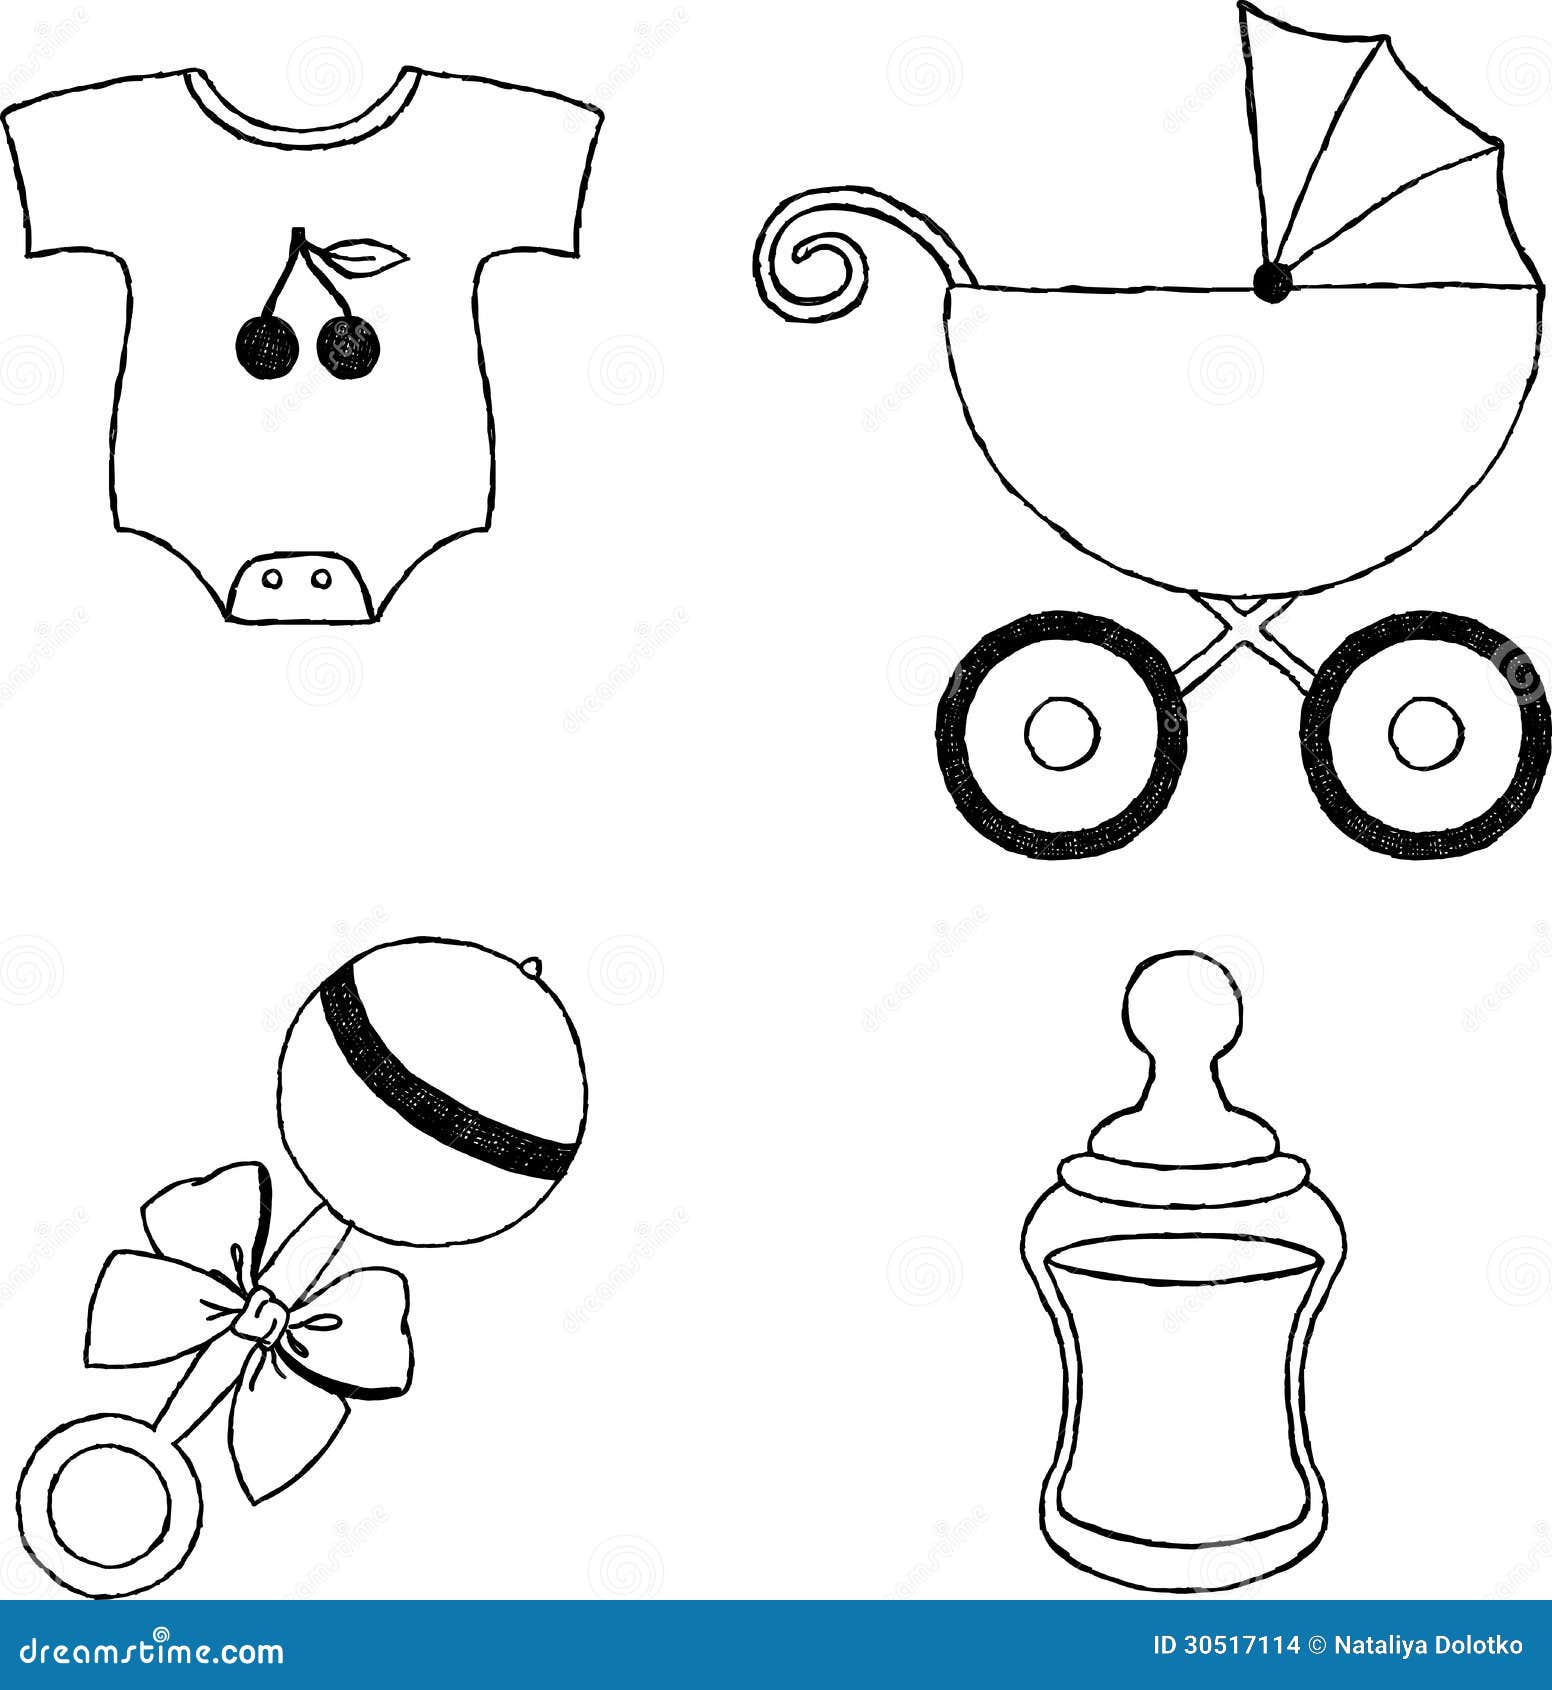 Uncolored Four Baby Stuff Icons Stock Vector - Image: 30517114